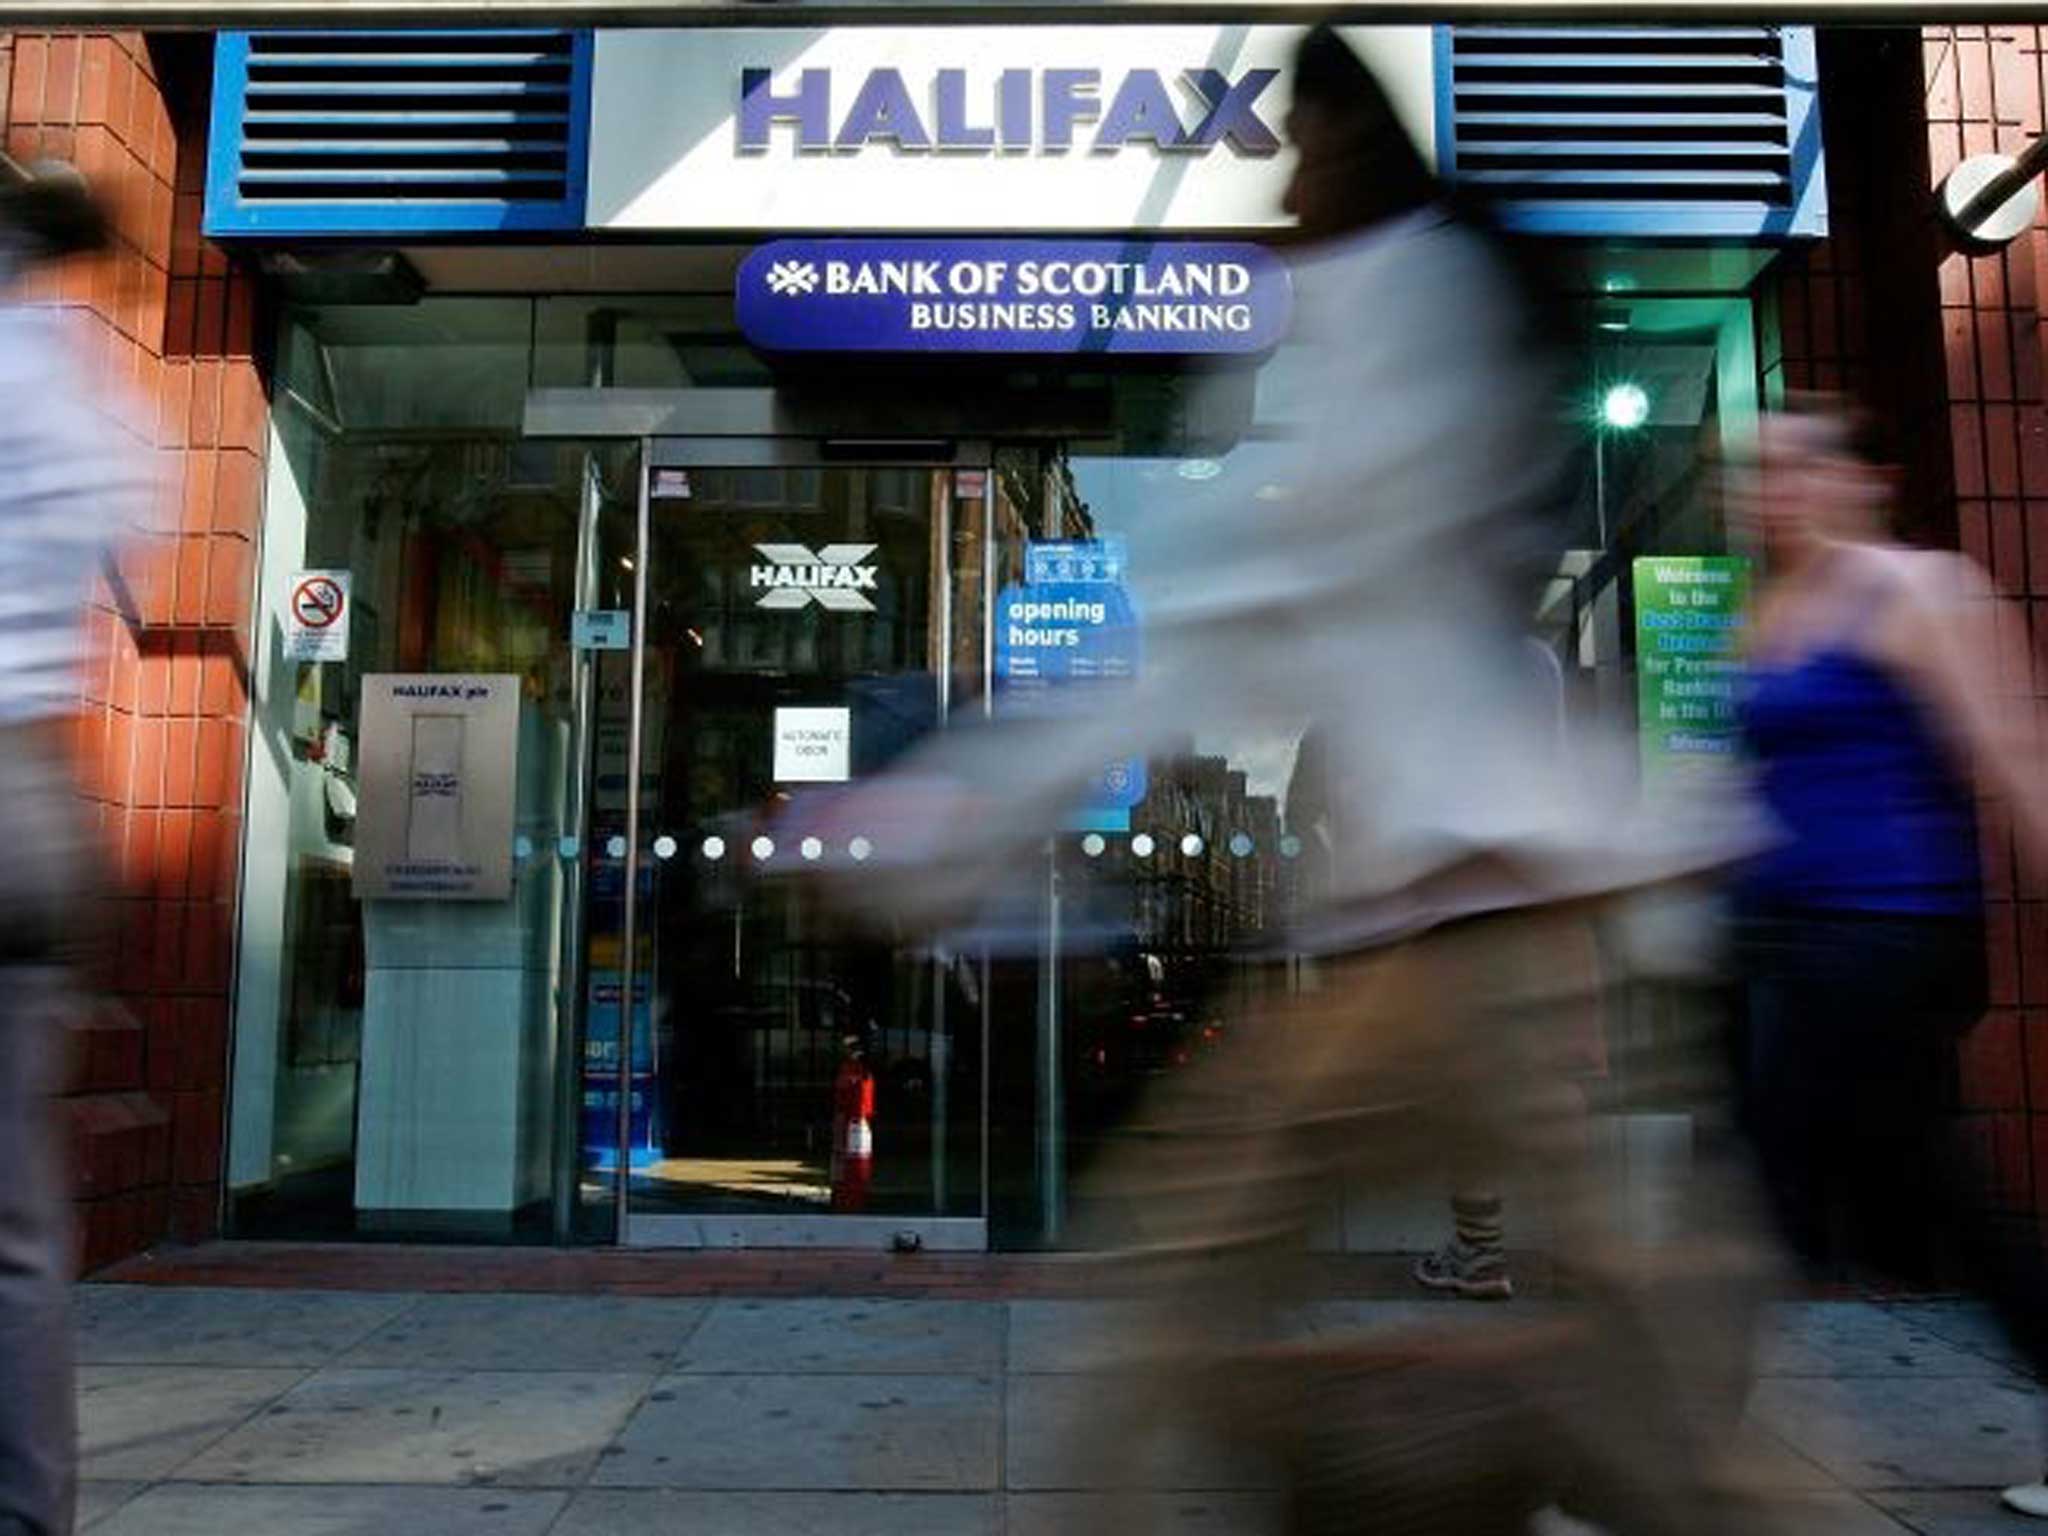 Halifax offers customers £5 a month to open an account